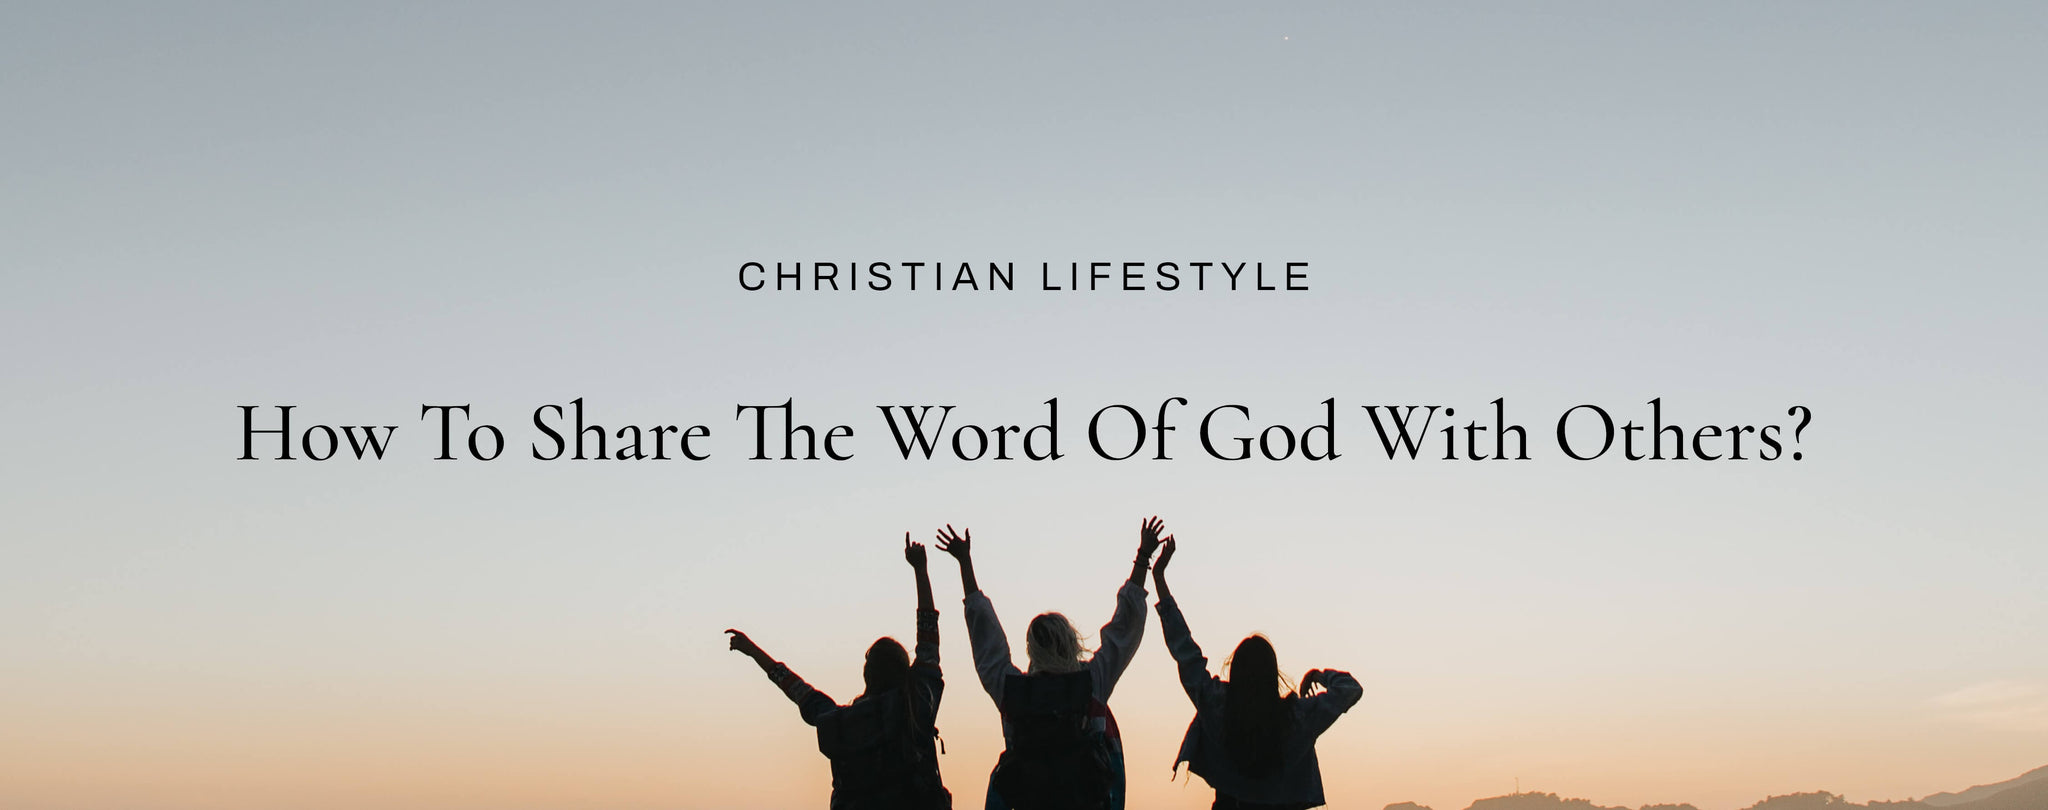 How to Share the Word of God with Others? | Lord's Guidance